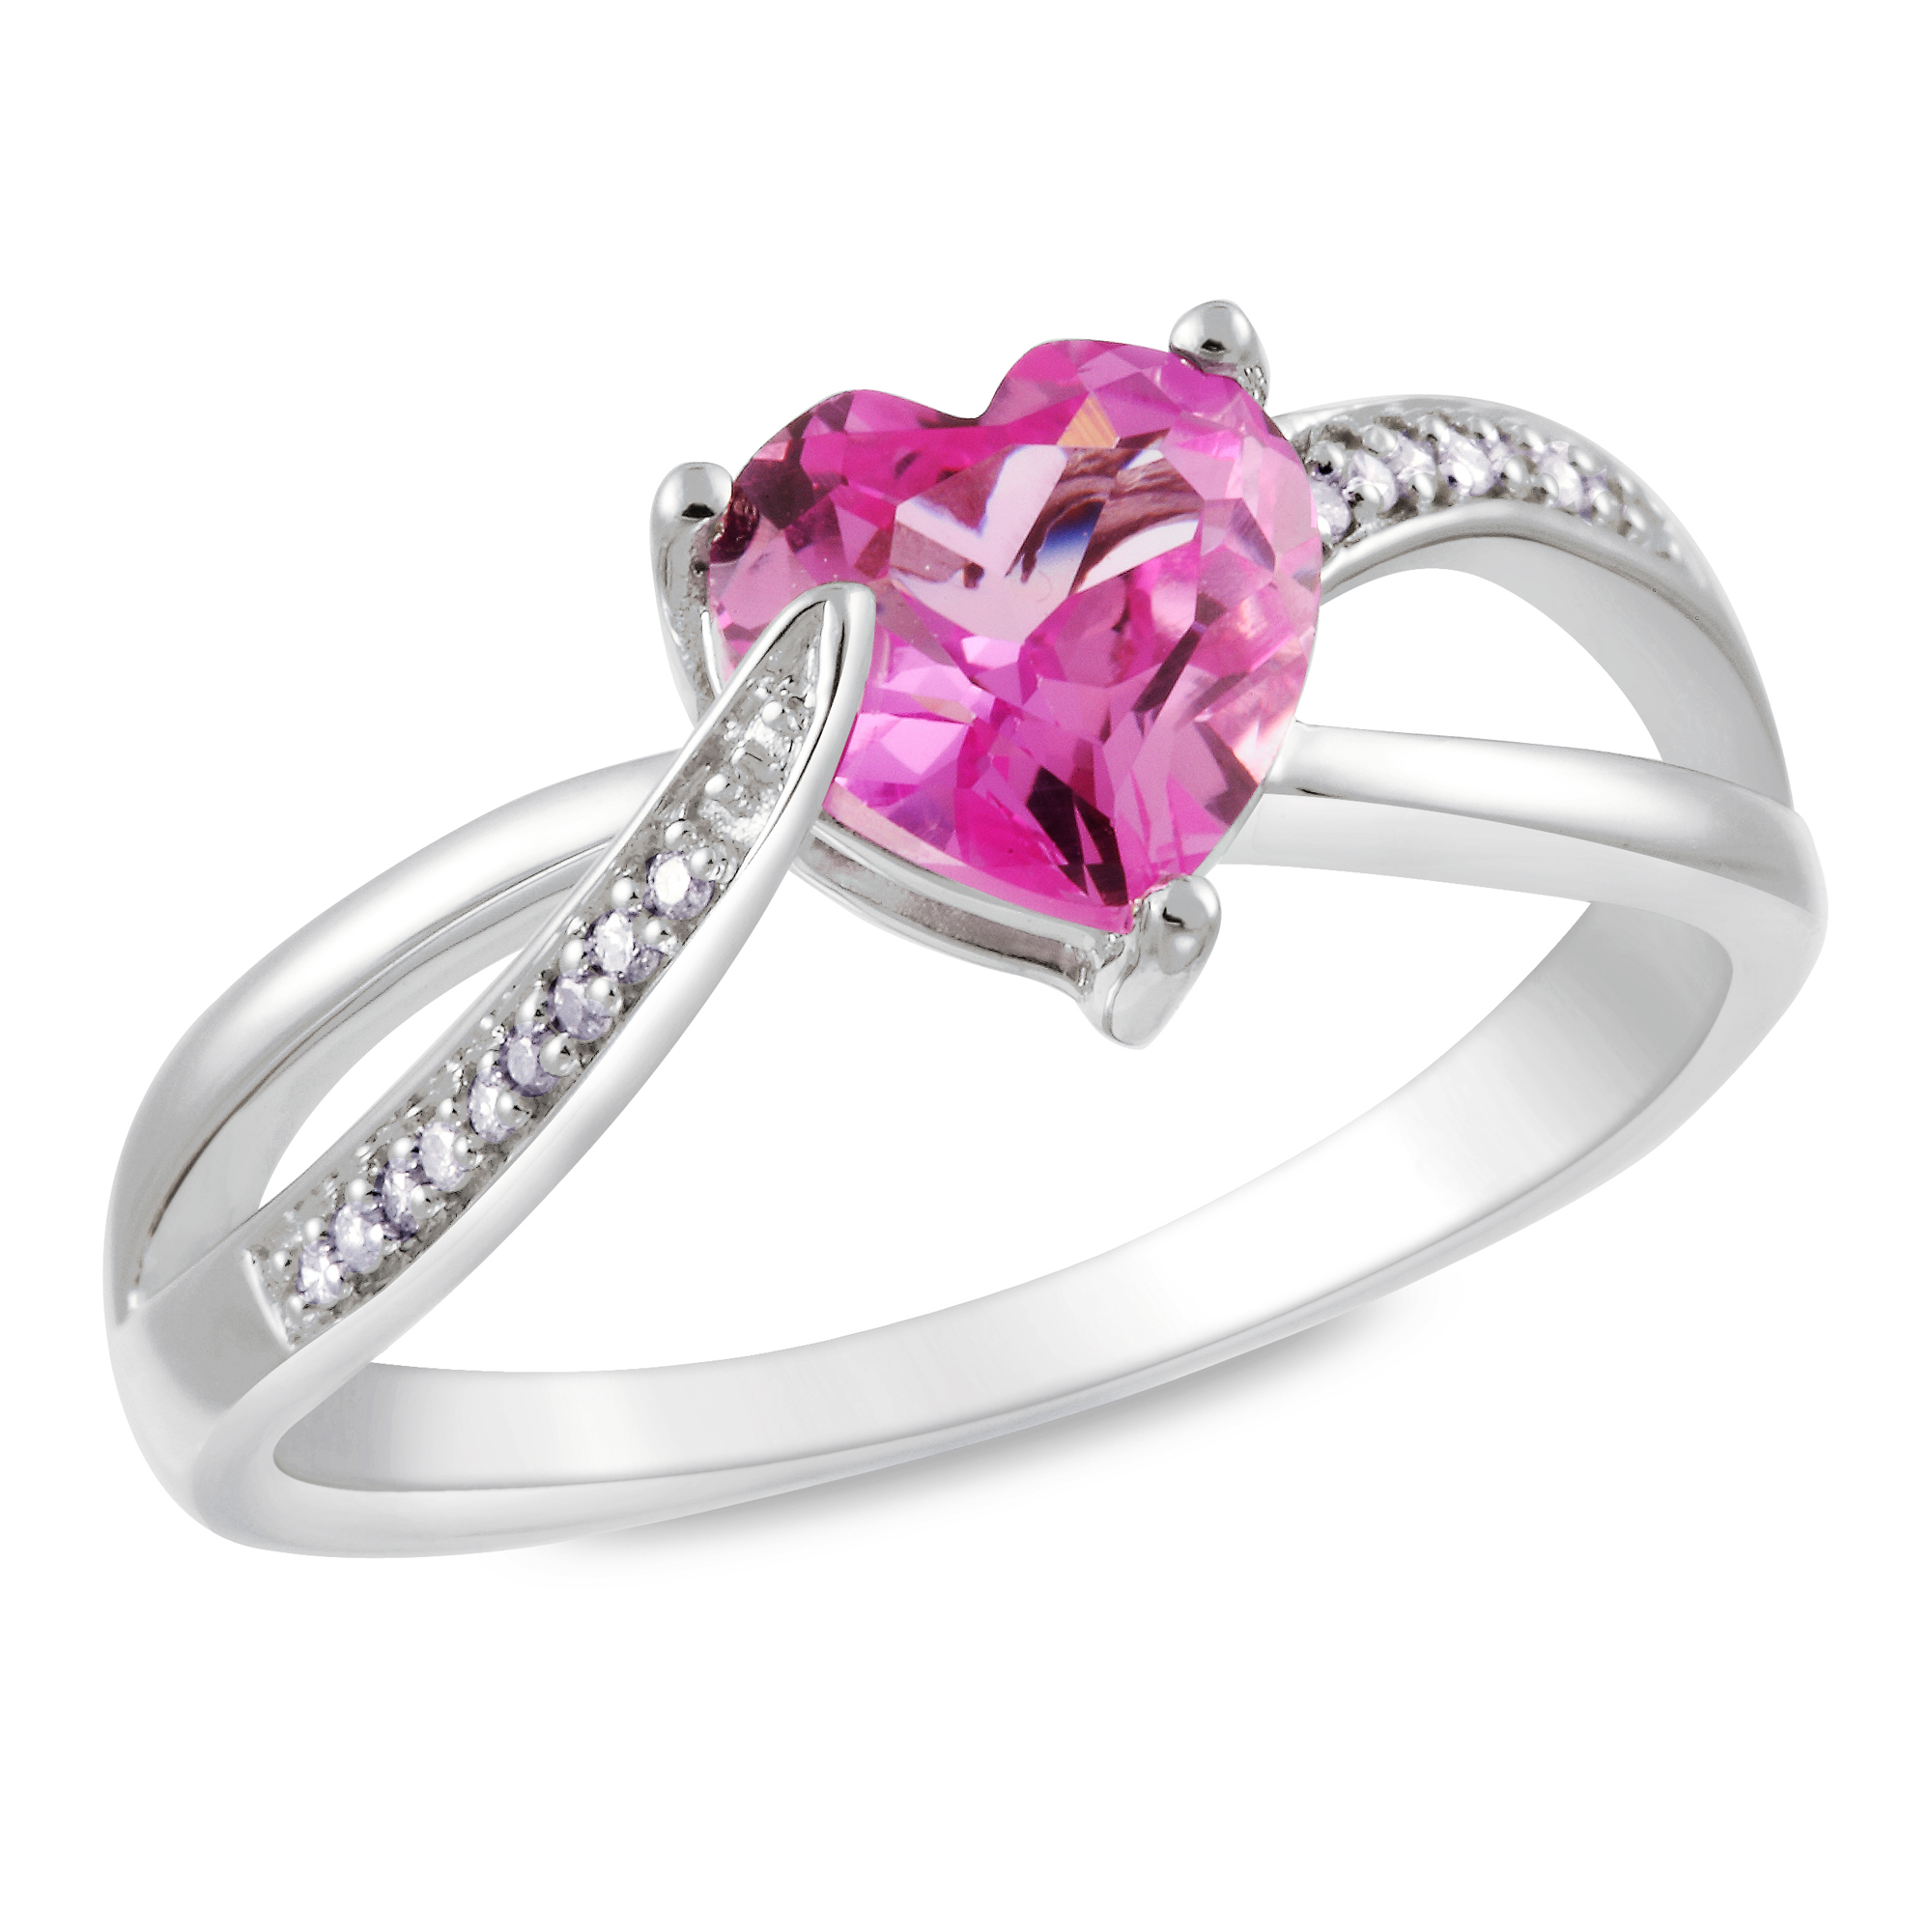 Amour 0.05 Carat T.W. Diamond and 1 1/2 Carat T.G.W. Created Pink Sapphire Fashion Ring in Sterling Silver GH I3